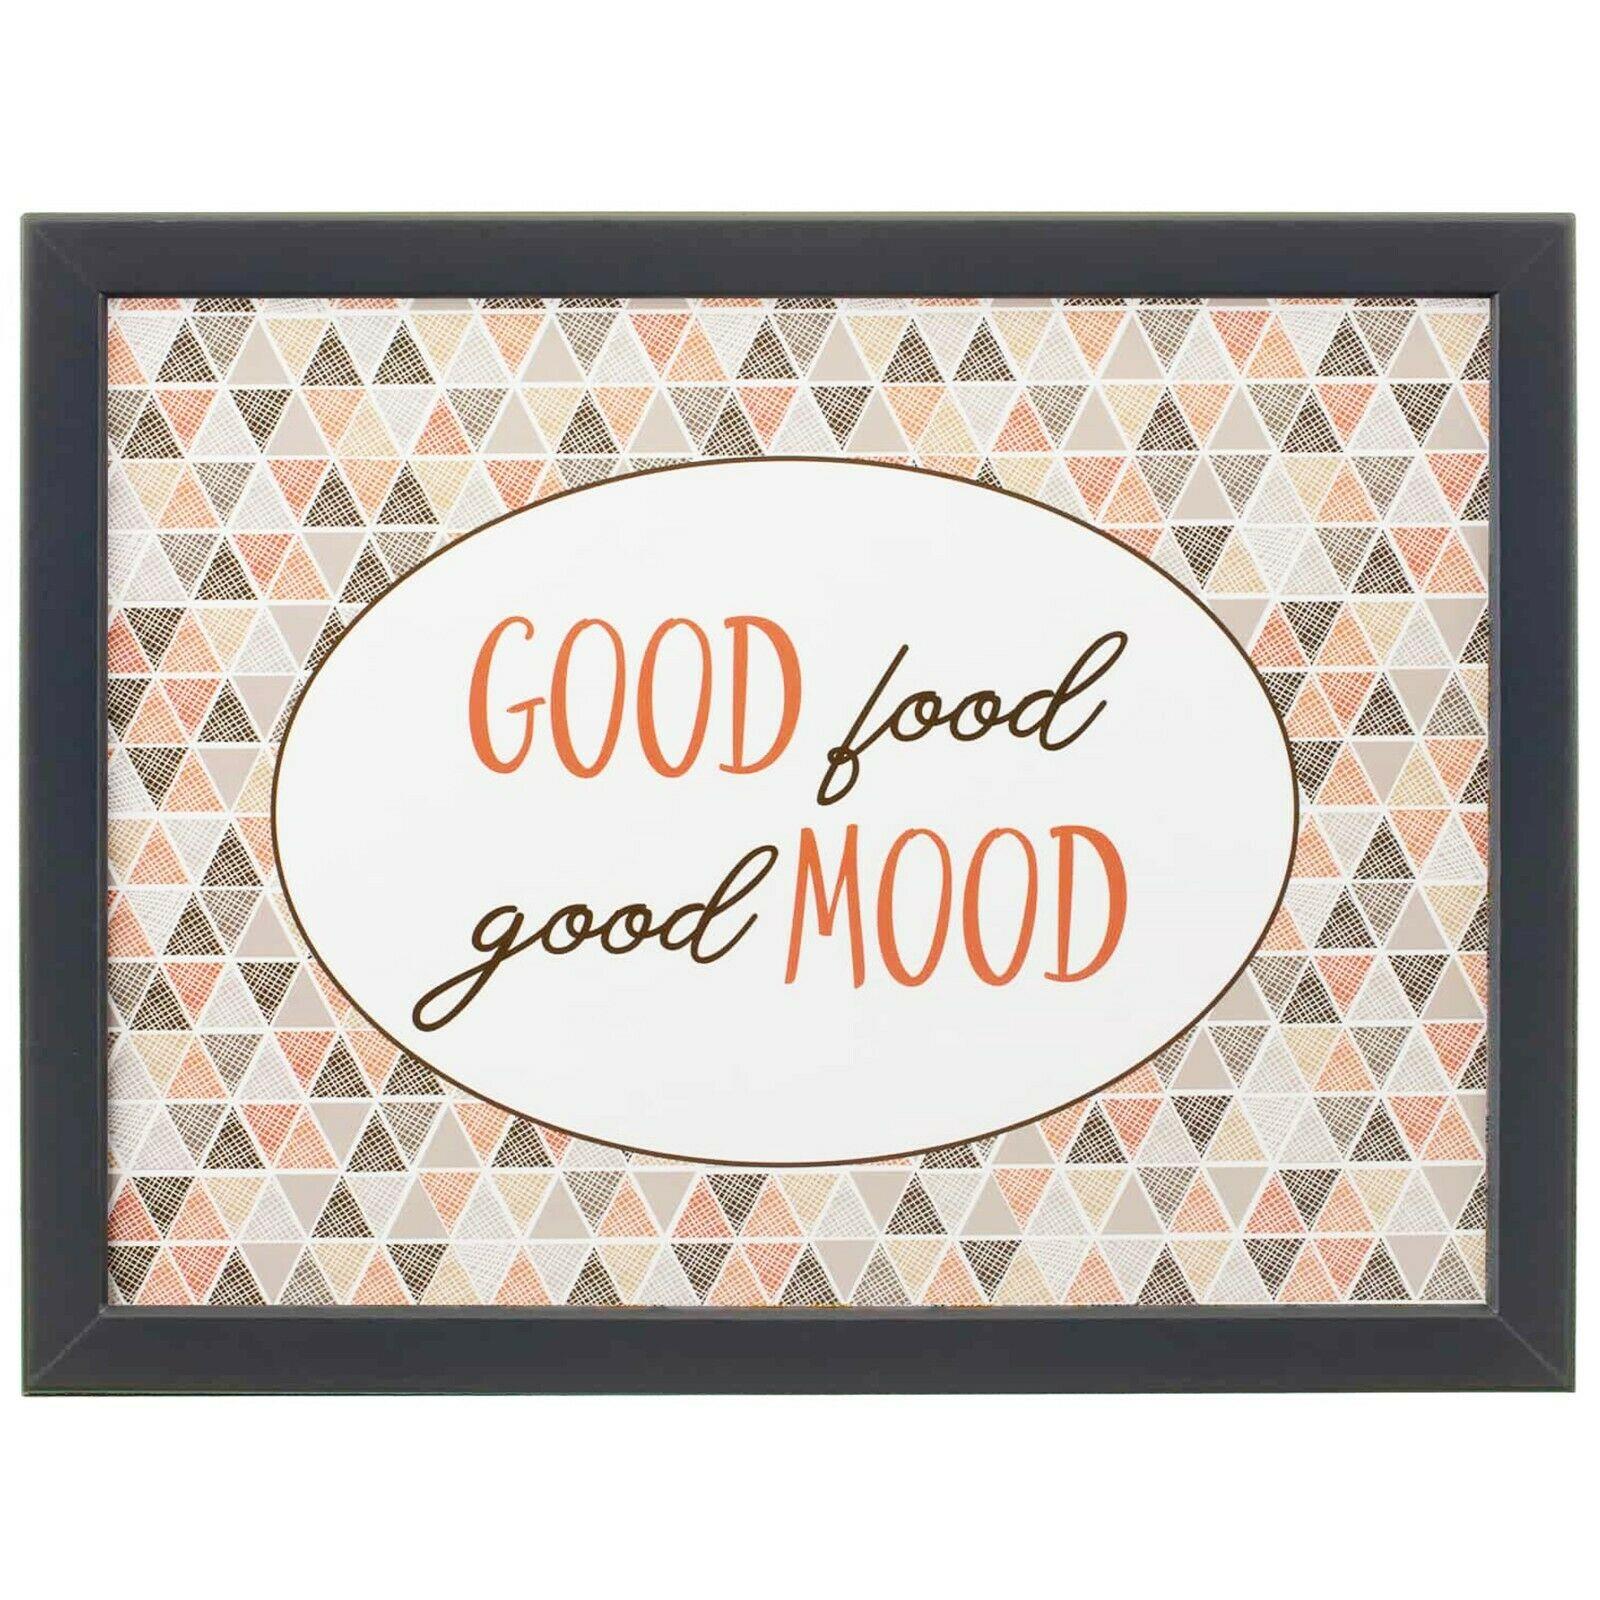 Good Food Good Mood Lap Tray With Bean Bag Cushion by Geezy - UKBuyZone